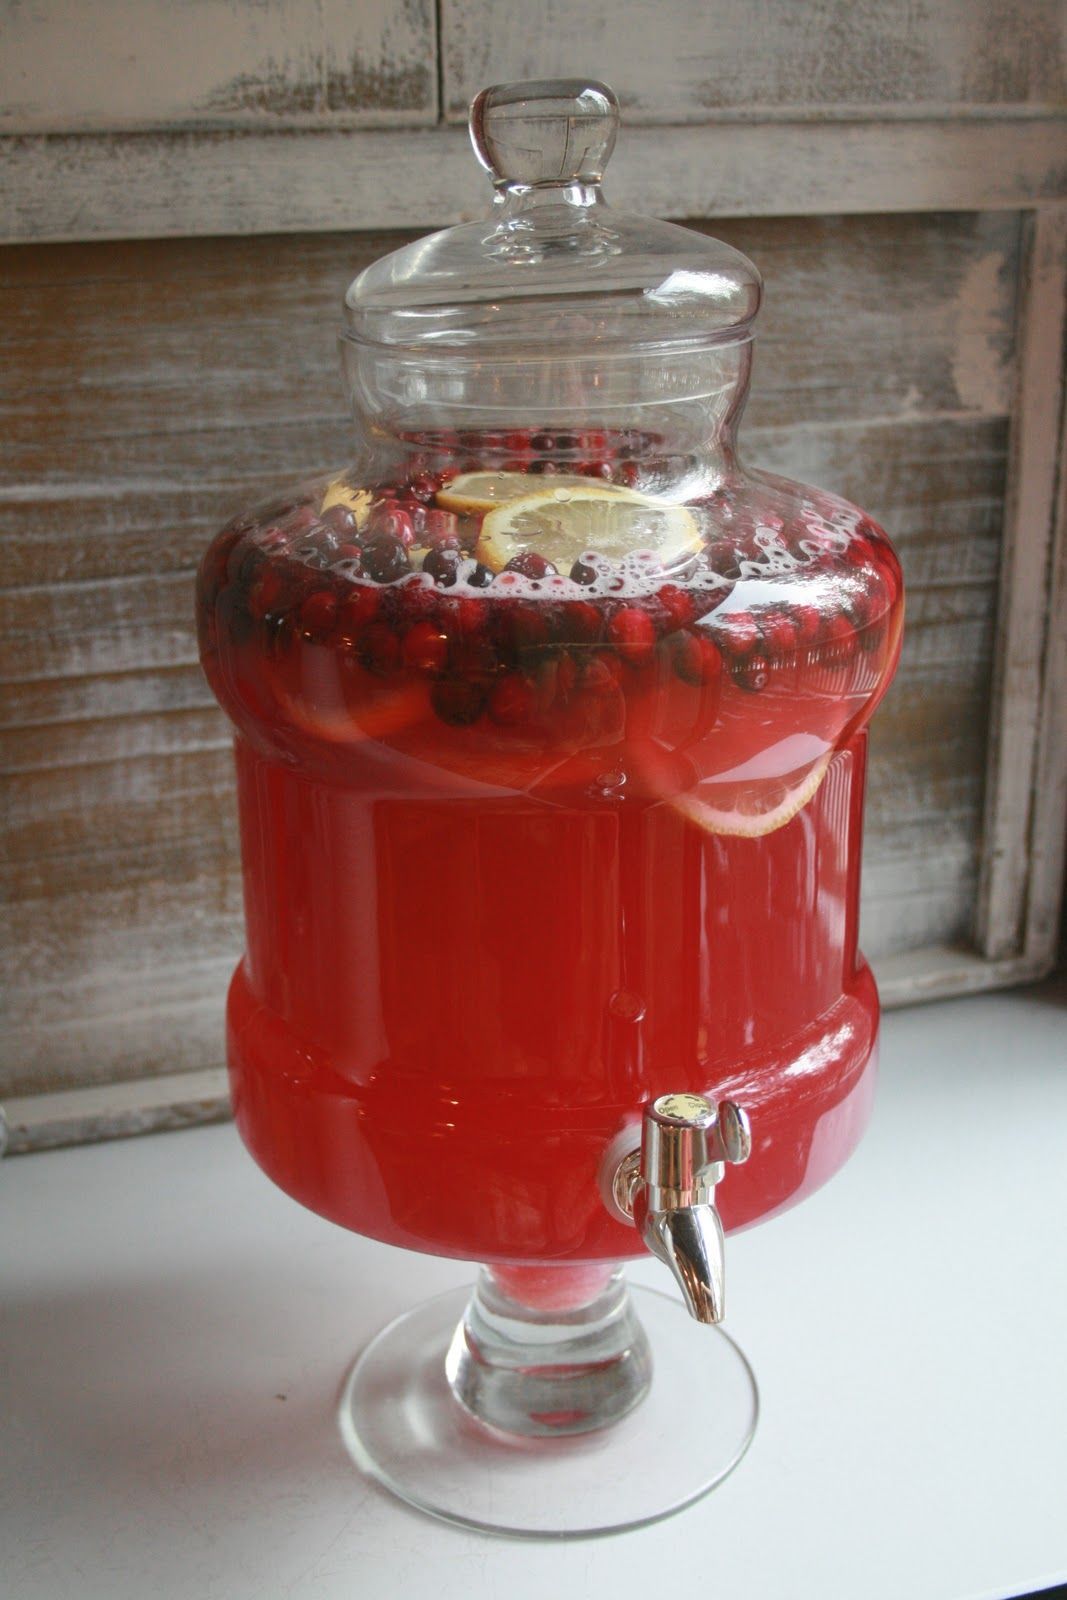 Christmas punch – one part lemonade, one part cranberry juice, one part ginger ale, a bag of cranberries and two sliced lemons.